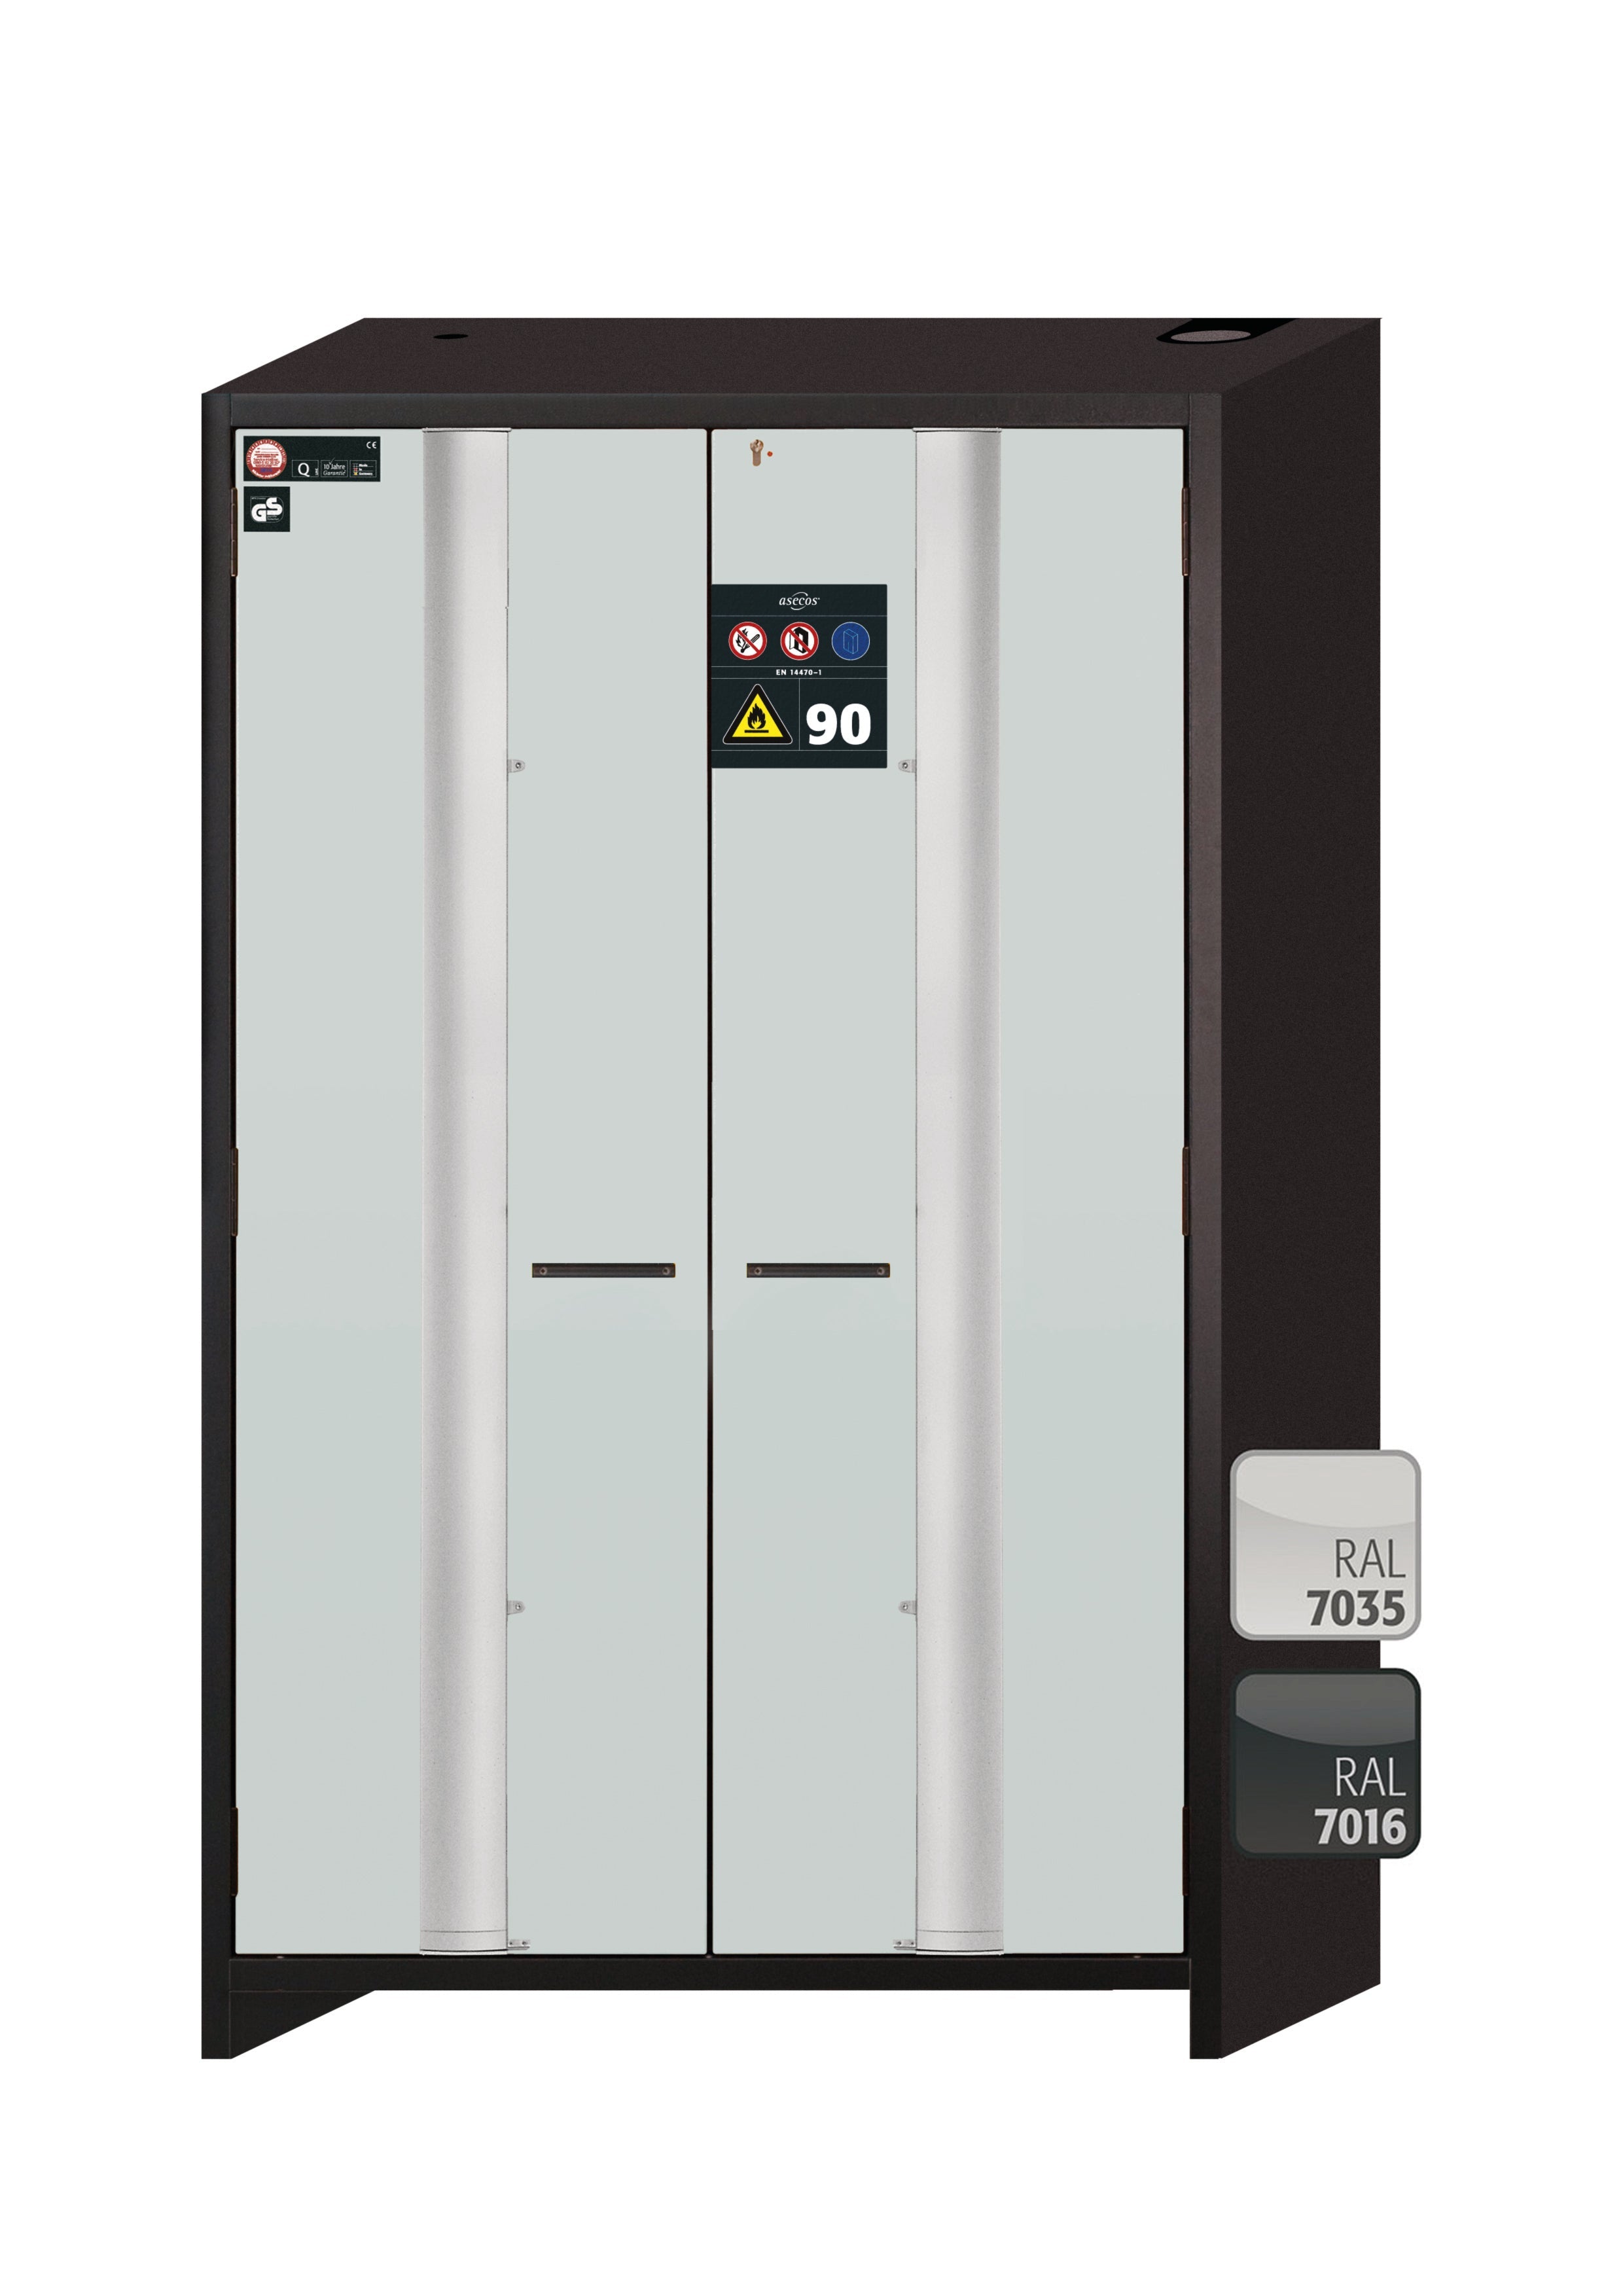 Type 90 safety cabinet Q-PHOENIX-90 model Q90.195.120.FD in light gray RAL 7035 with 3x standard pull-out tray (sheet steel)